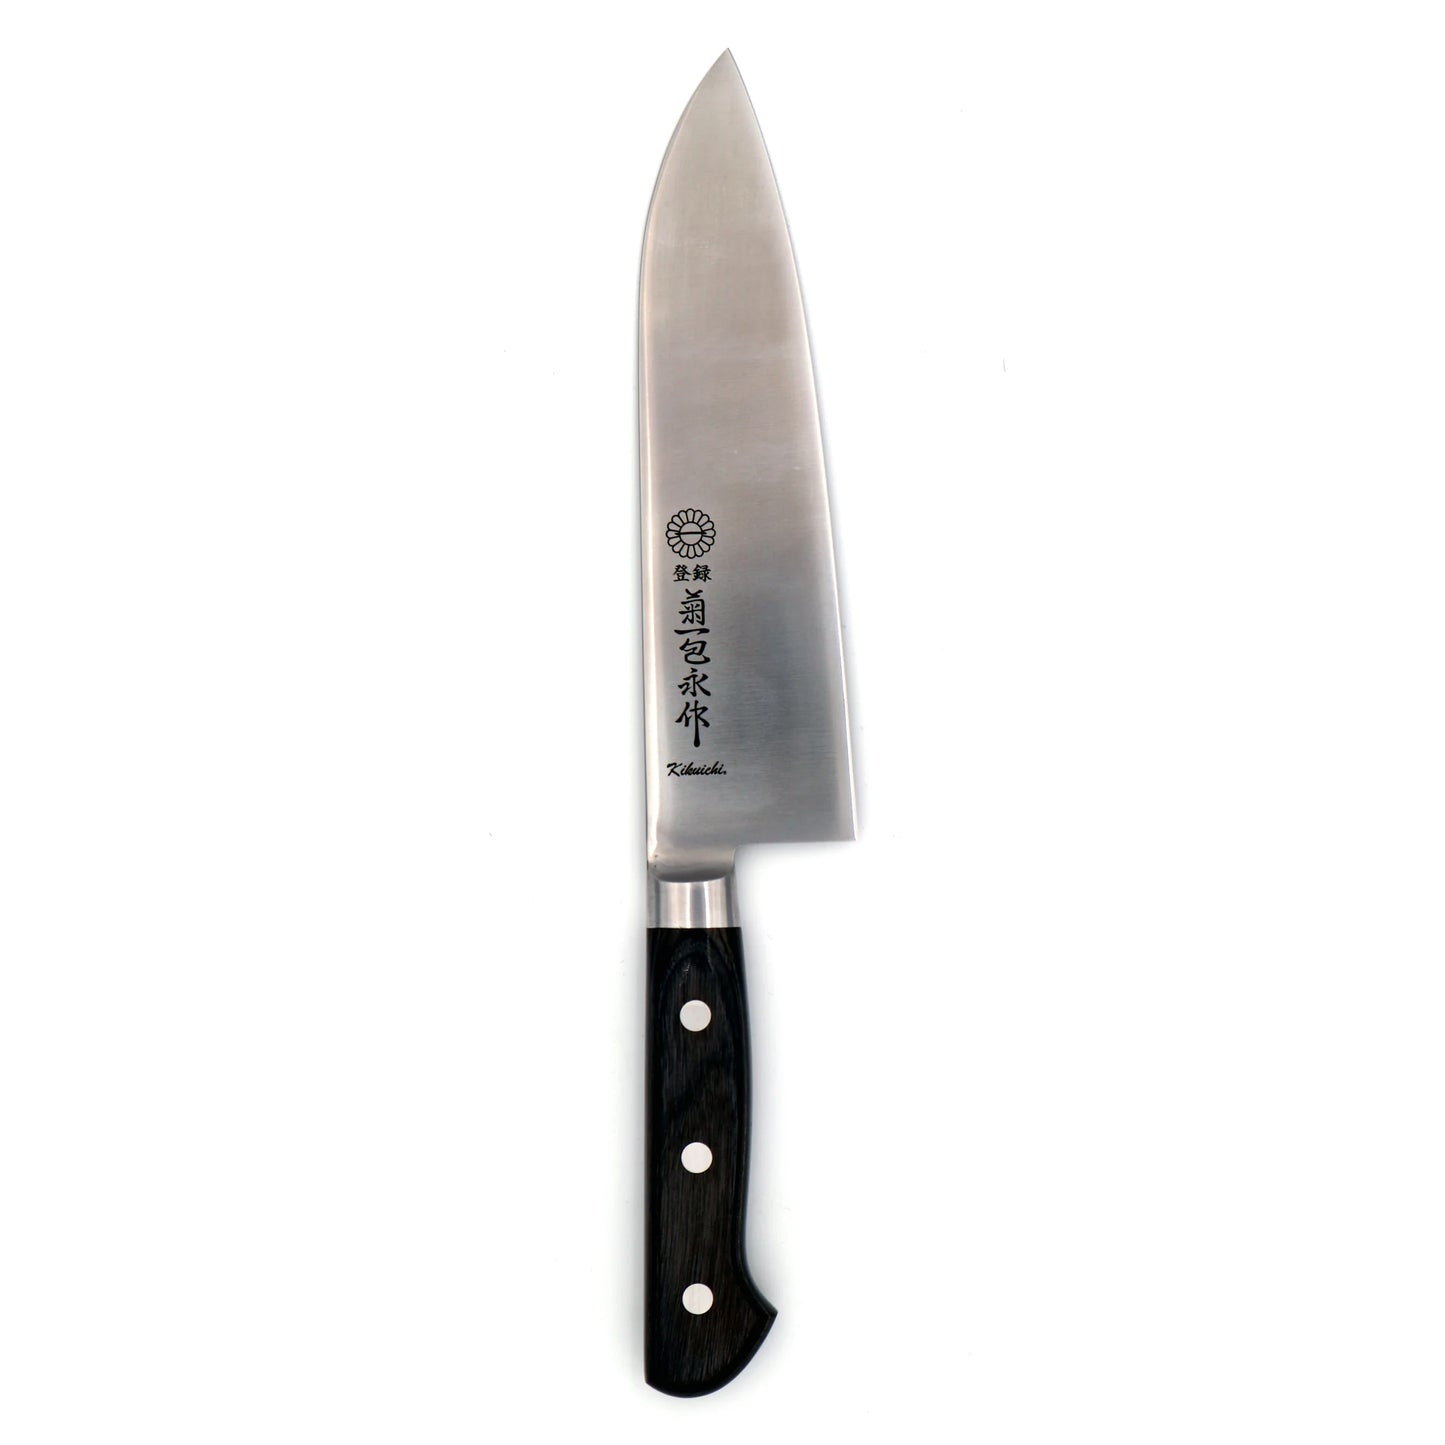 The Kikuichi SEM Series Semi-Stainless Santoku Knife, a versatile and reliable kitchen tool designed to excel at the three essential cutting tasks a Santoku knife is known for: slicing, dicing, and mincing.